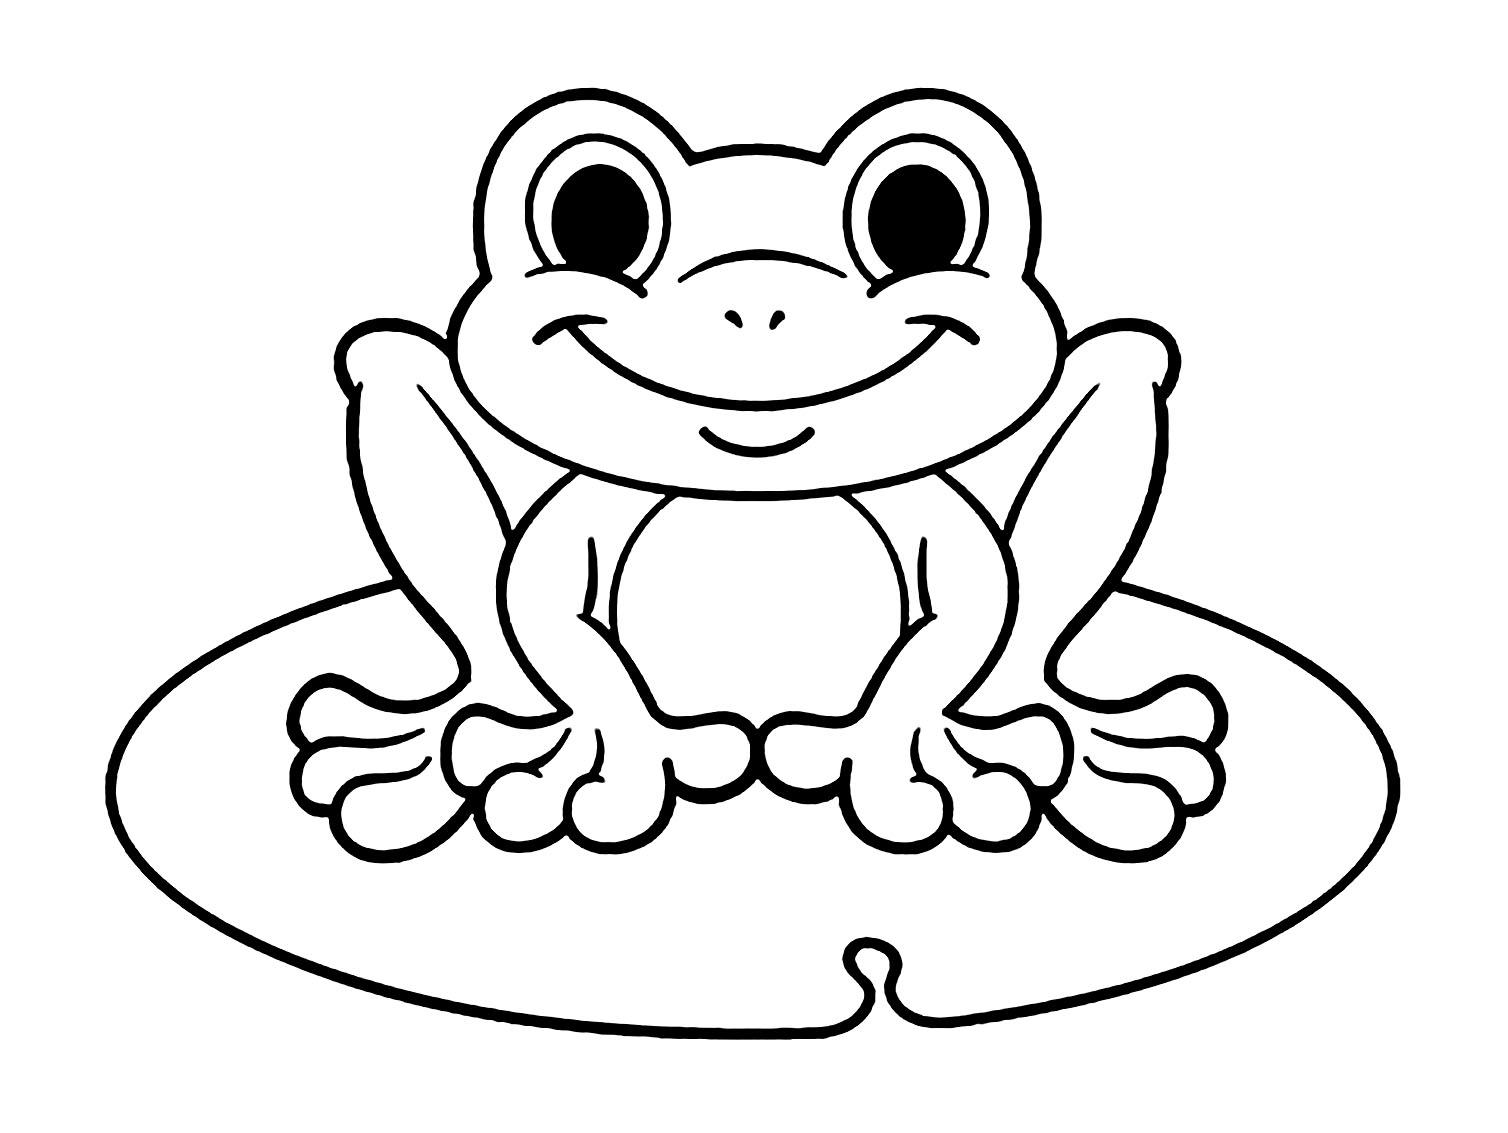 frog-coloring-page-to-print-frogs-kids-coloring-pages